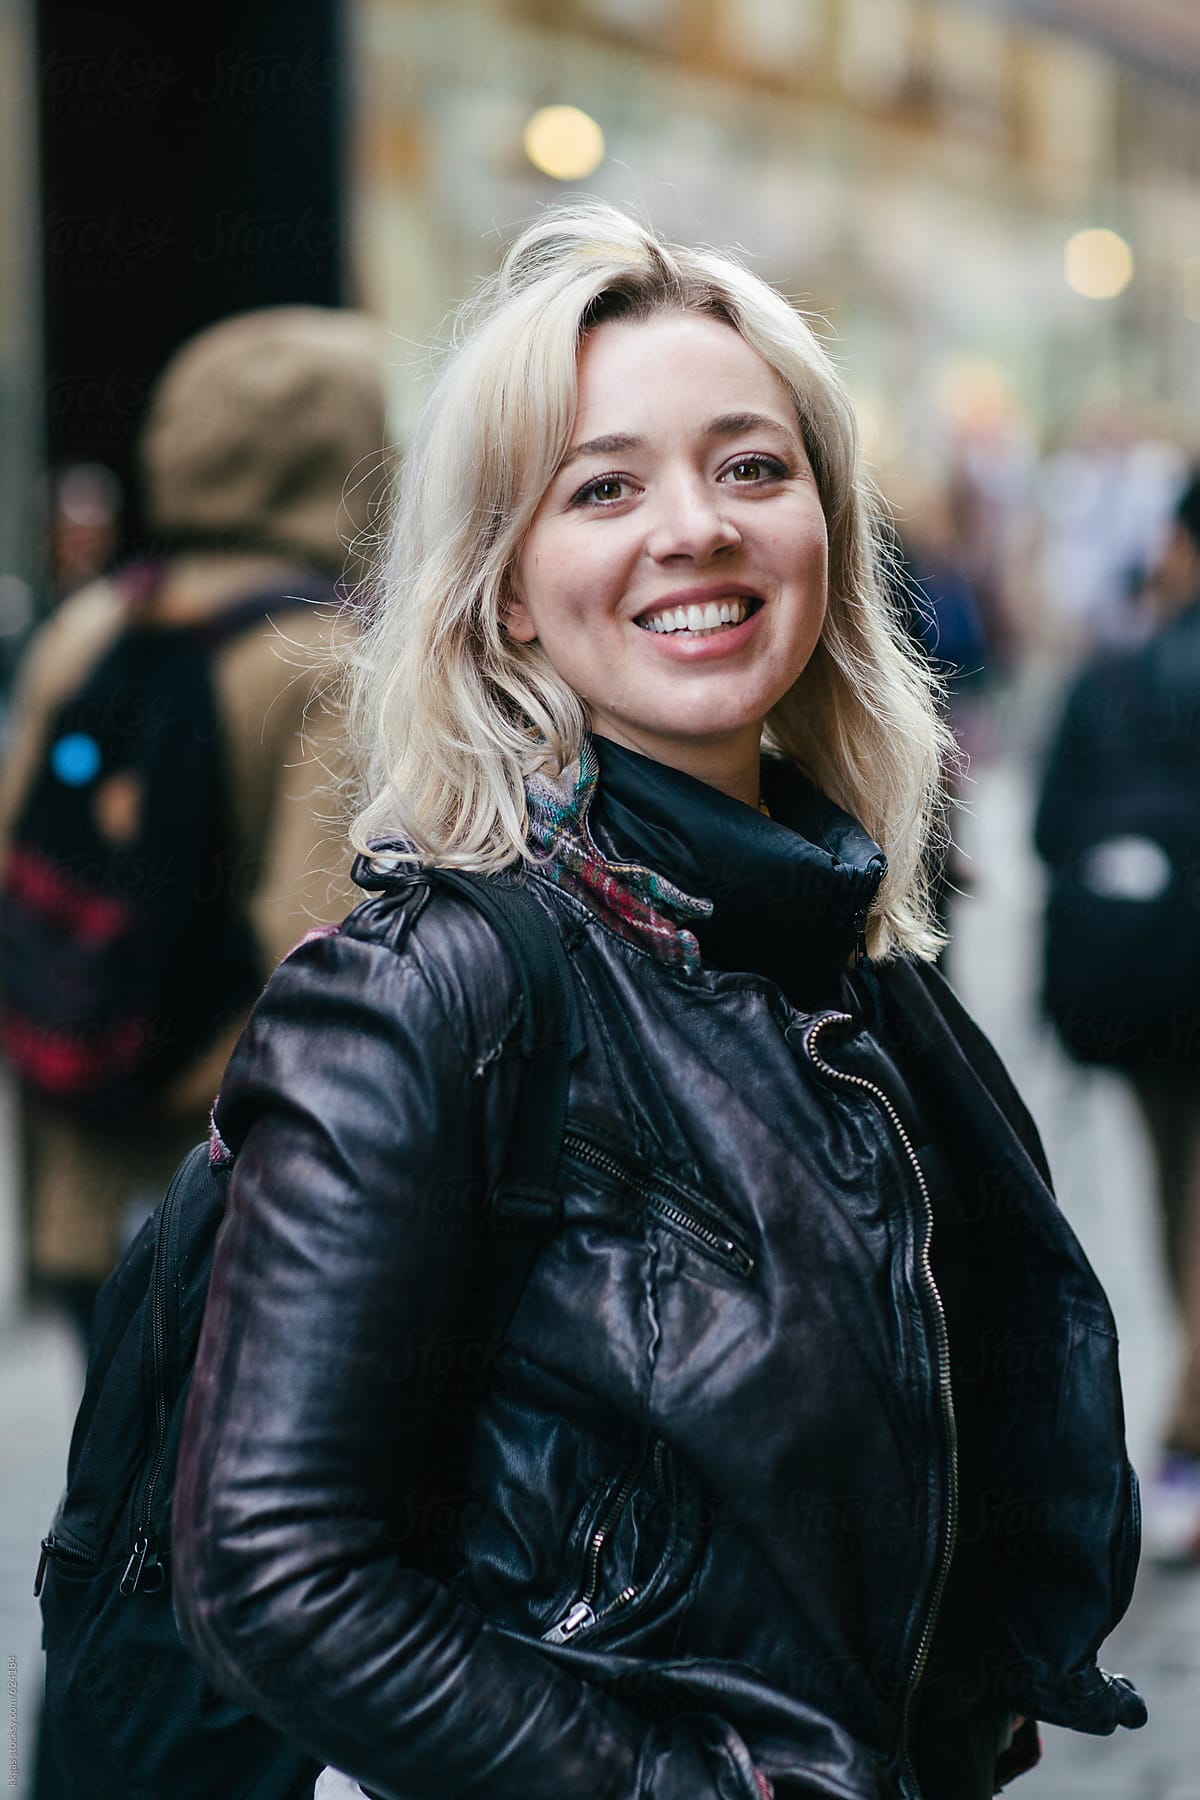 Portrait of a blonde young woman in London.